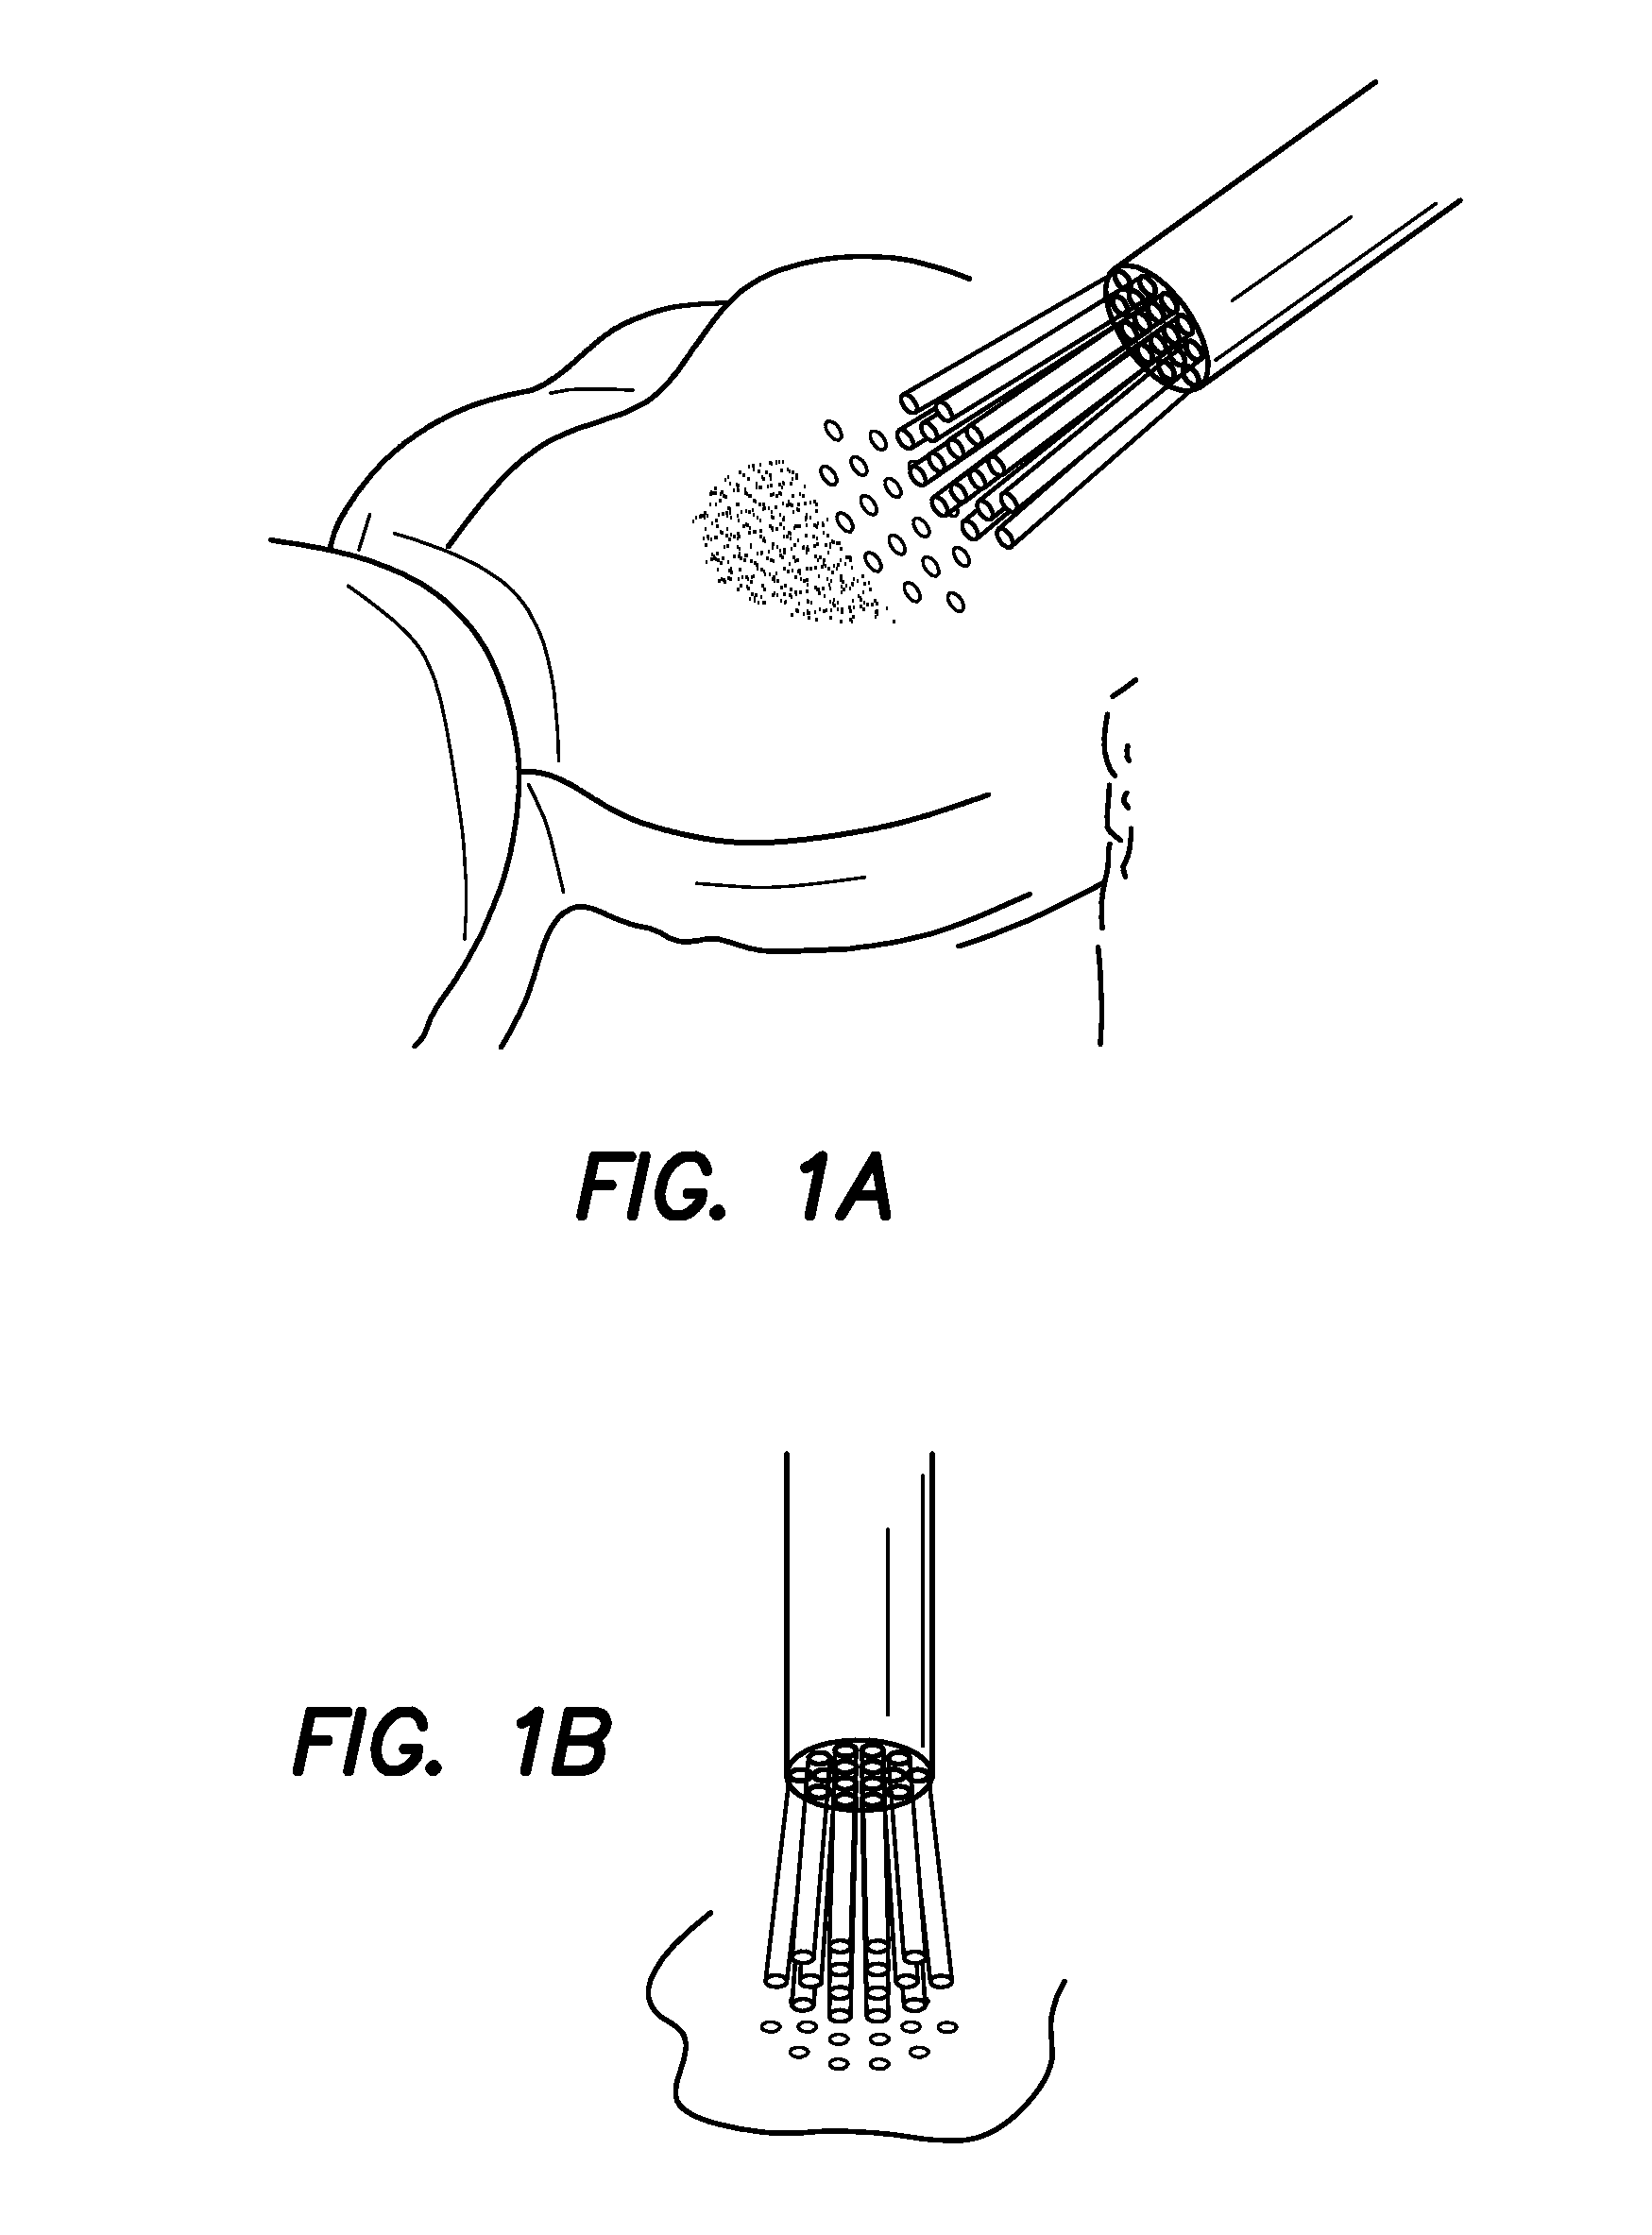 Probes and biofluids for treating and removing deposits from tissue surfaces